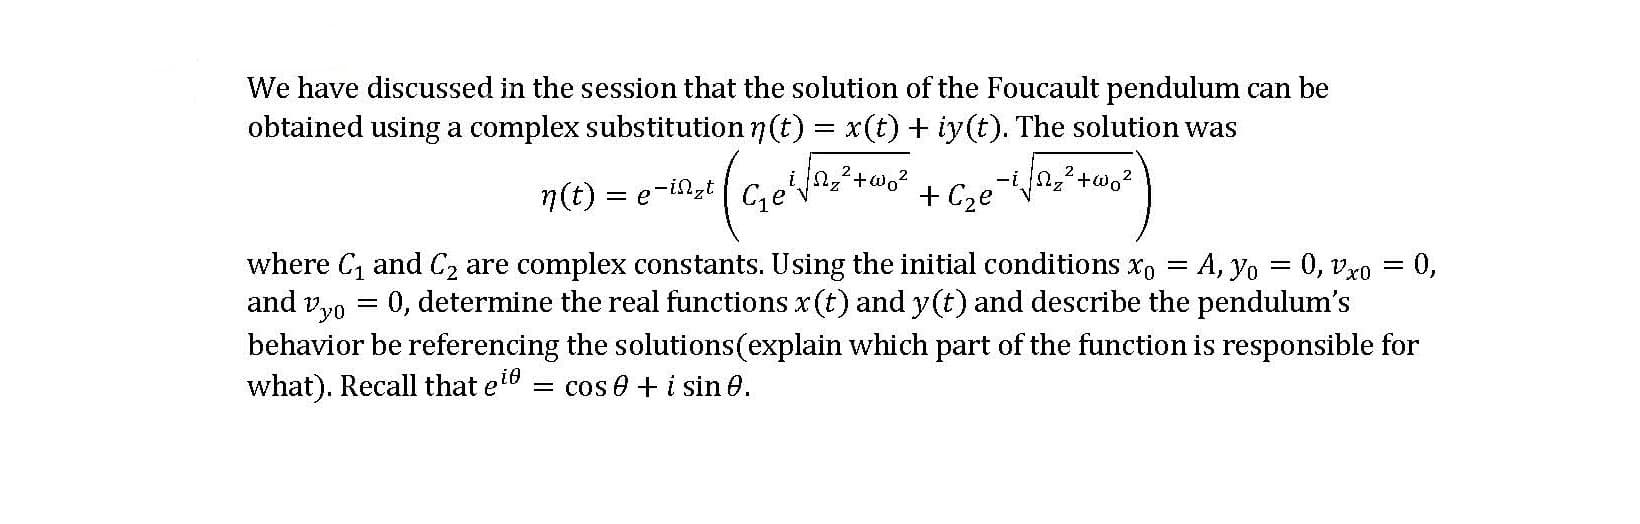 We have discussed in the session that the solution of the Foucault pendulum can be
obtained using a complex substitution 7(t) = x(t)+ iy(t). The solution was
2.
2
n(t) =
= e-in,t
Ce
+ Cze
where C, and Cz are complex constants. Using the initial conditions x, = A, yo = 0, vxo = 0,
and vyo = 0, determine the real functions x (t) and y(t) and describe the pendulum's
behavior be referencing the solutions(explain which part of the function is responsible for
what). Recall that e16
= cos e + i sin 0.
